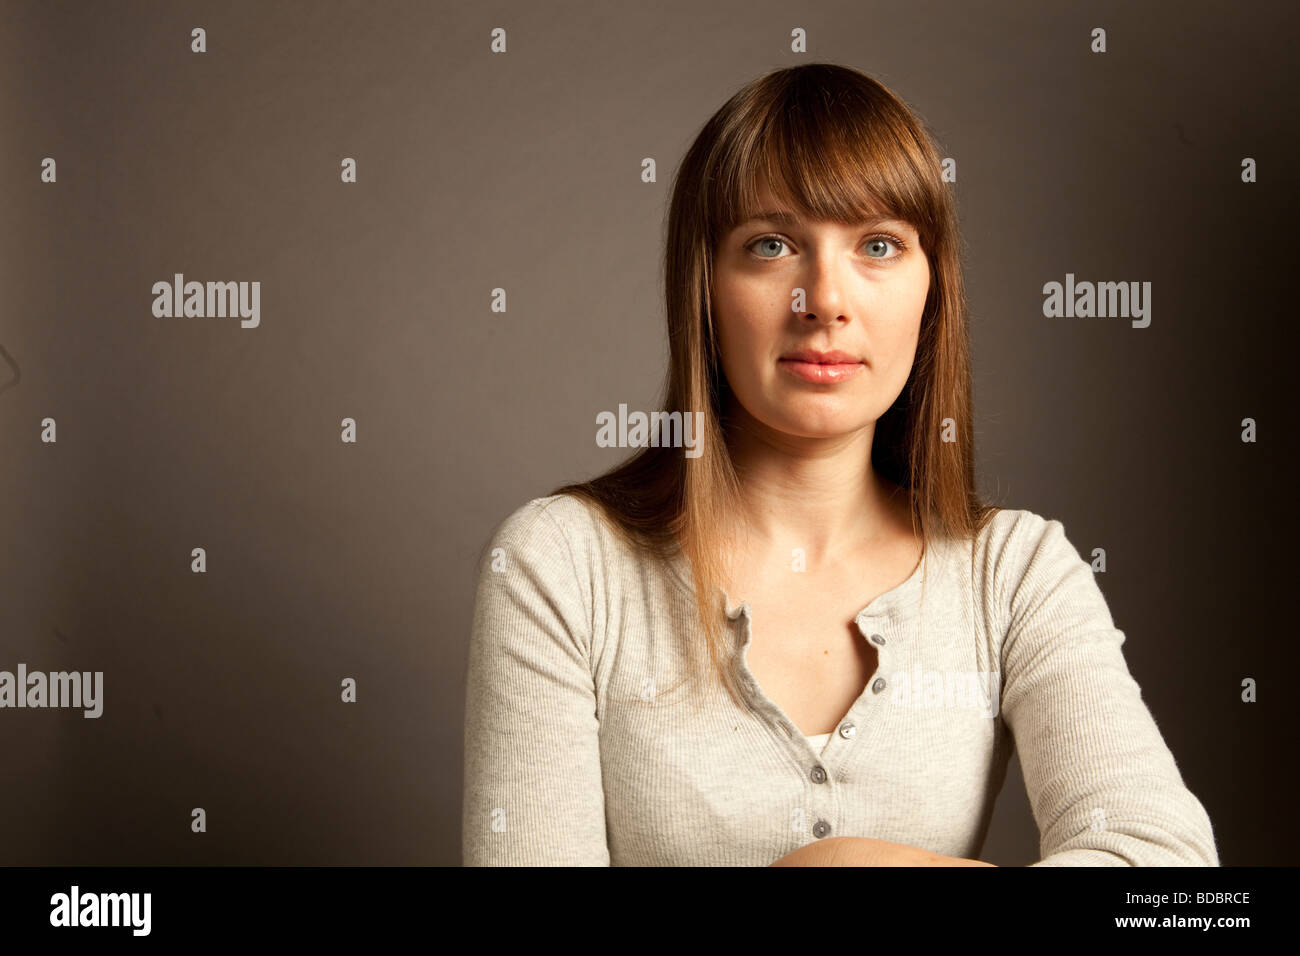 Upper body portrait of a woman with long brown hair and blue eyes sitting in studio. Stock Photo